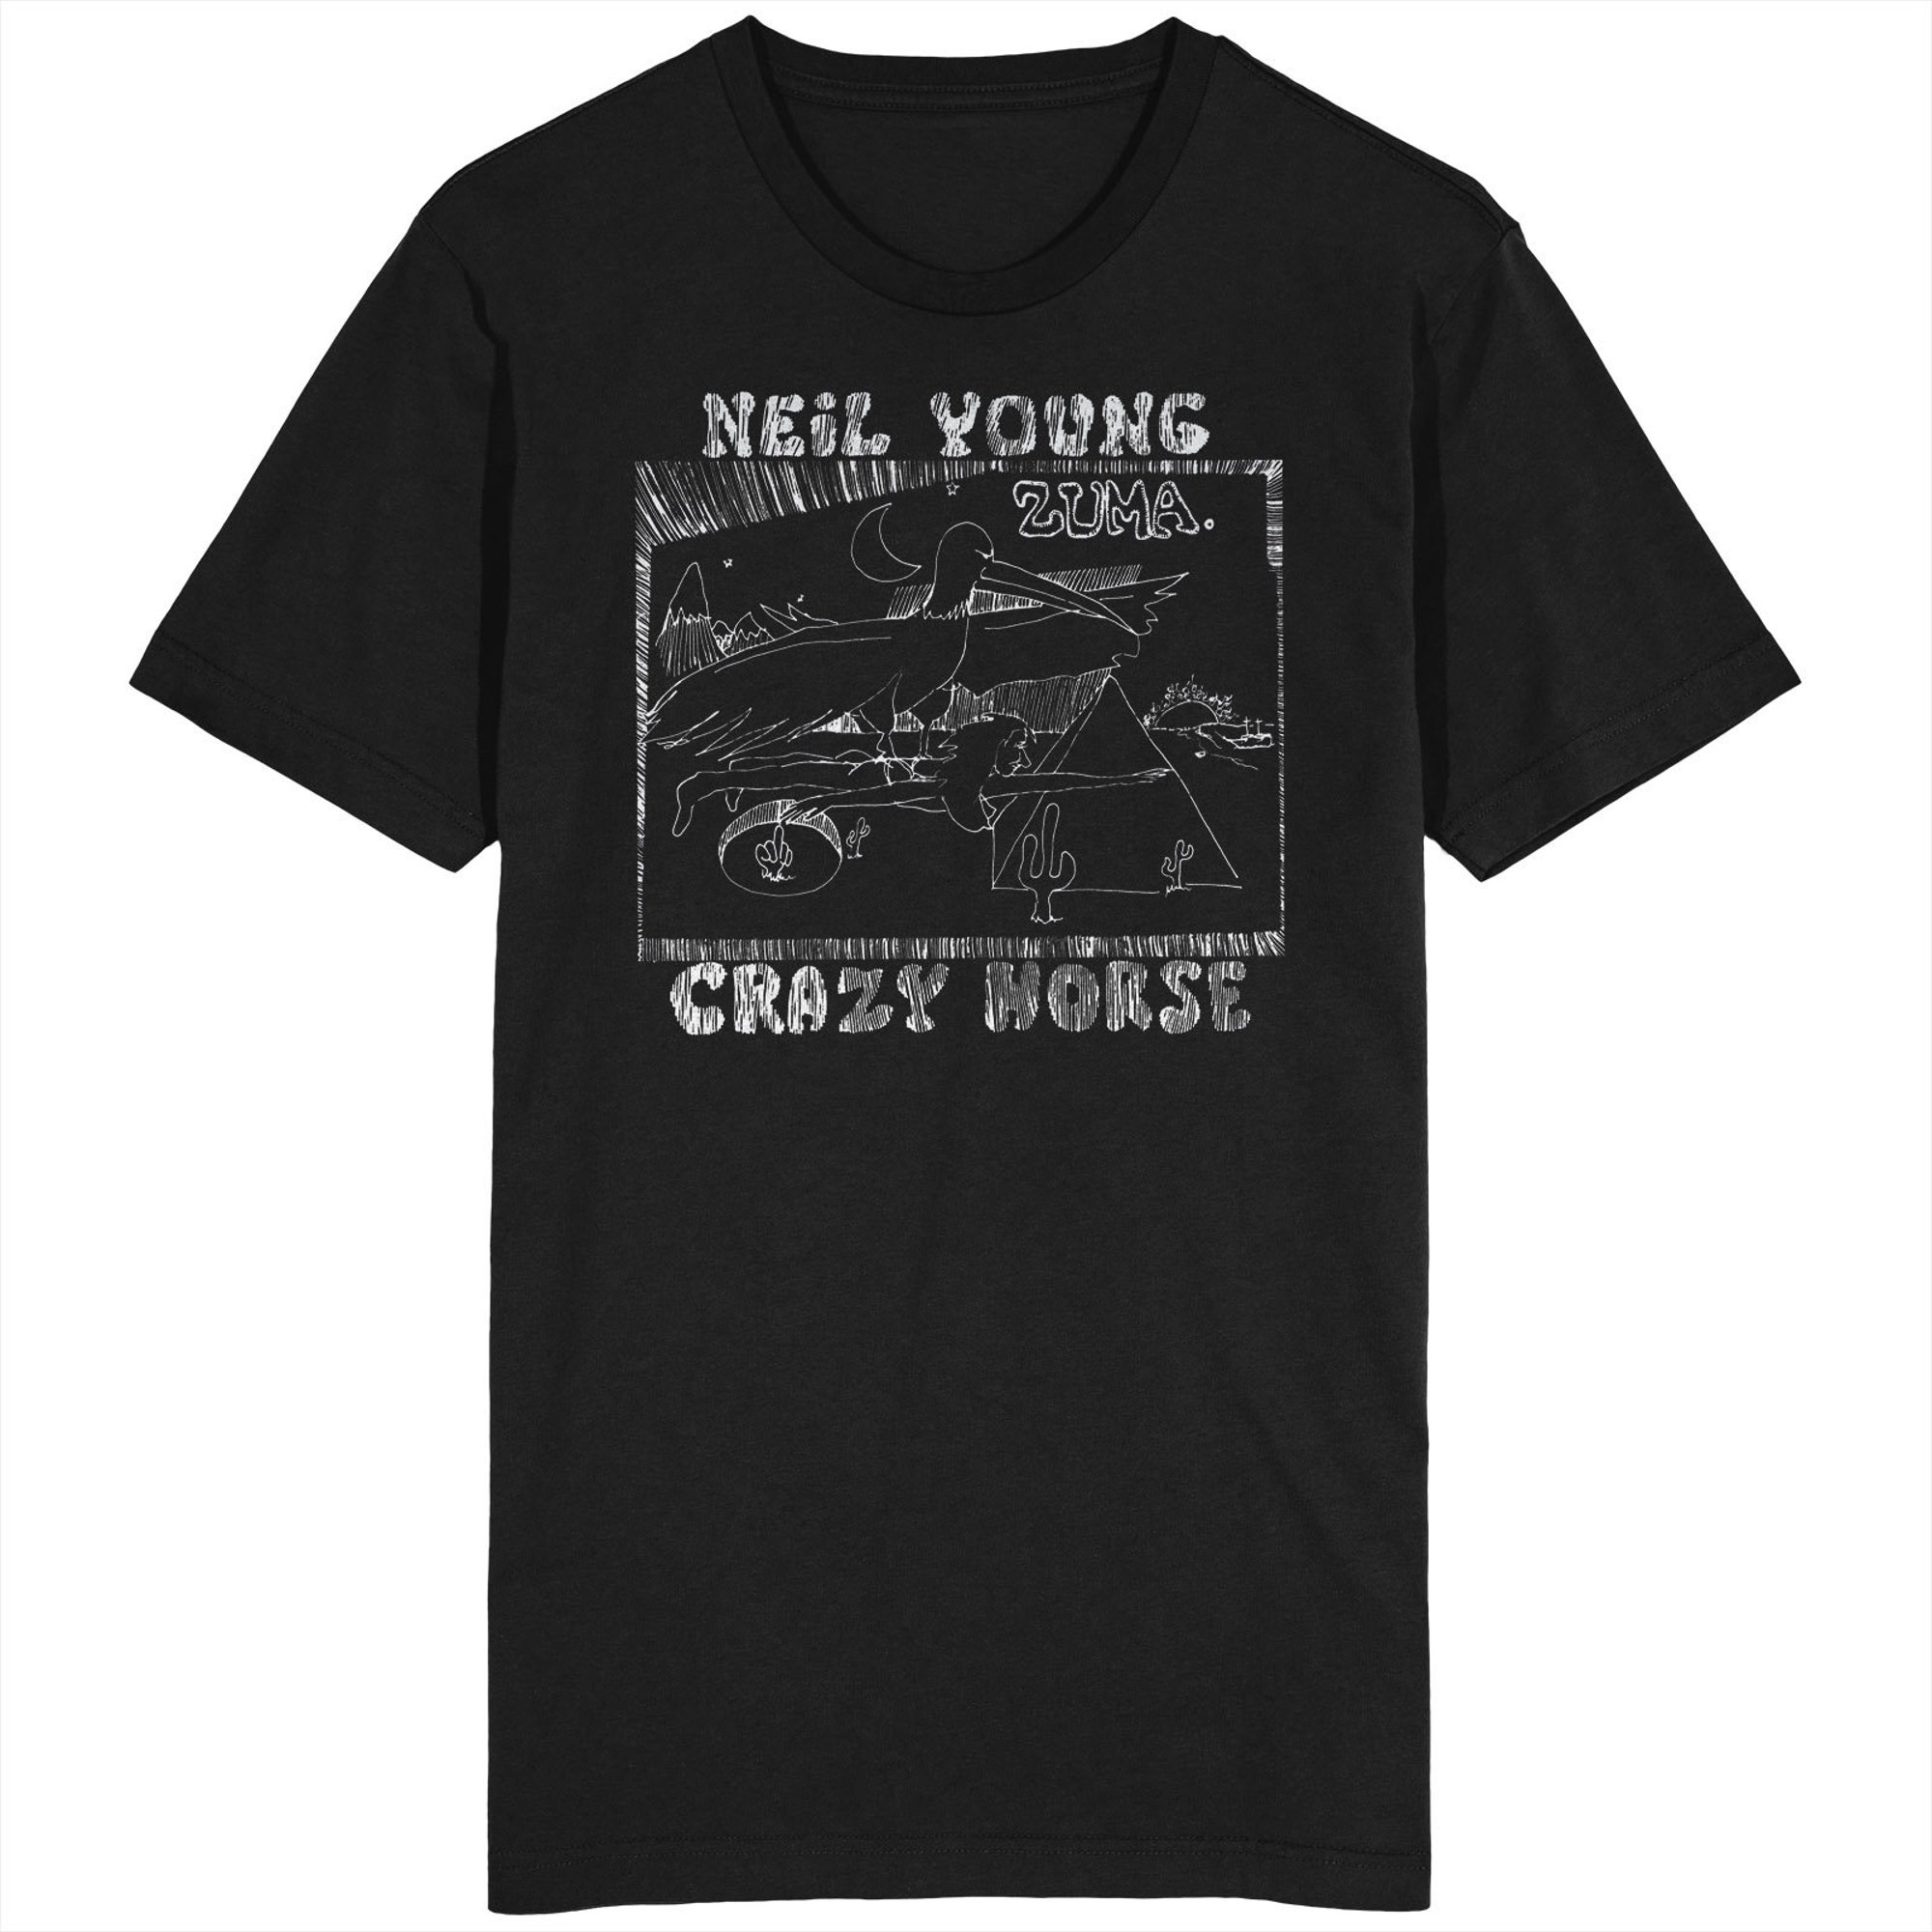 Discover Neil Young And Crazy Horse Zuma T-shirt Top Reprise Records Cortez The Killer